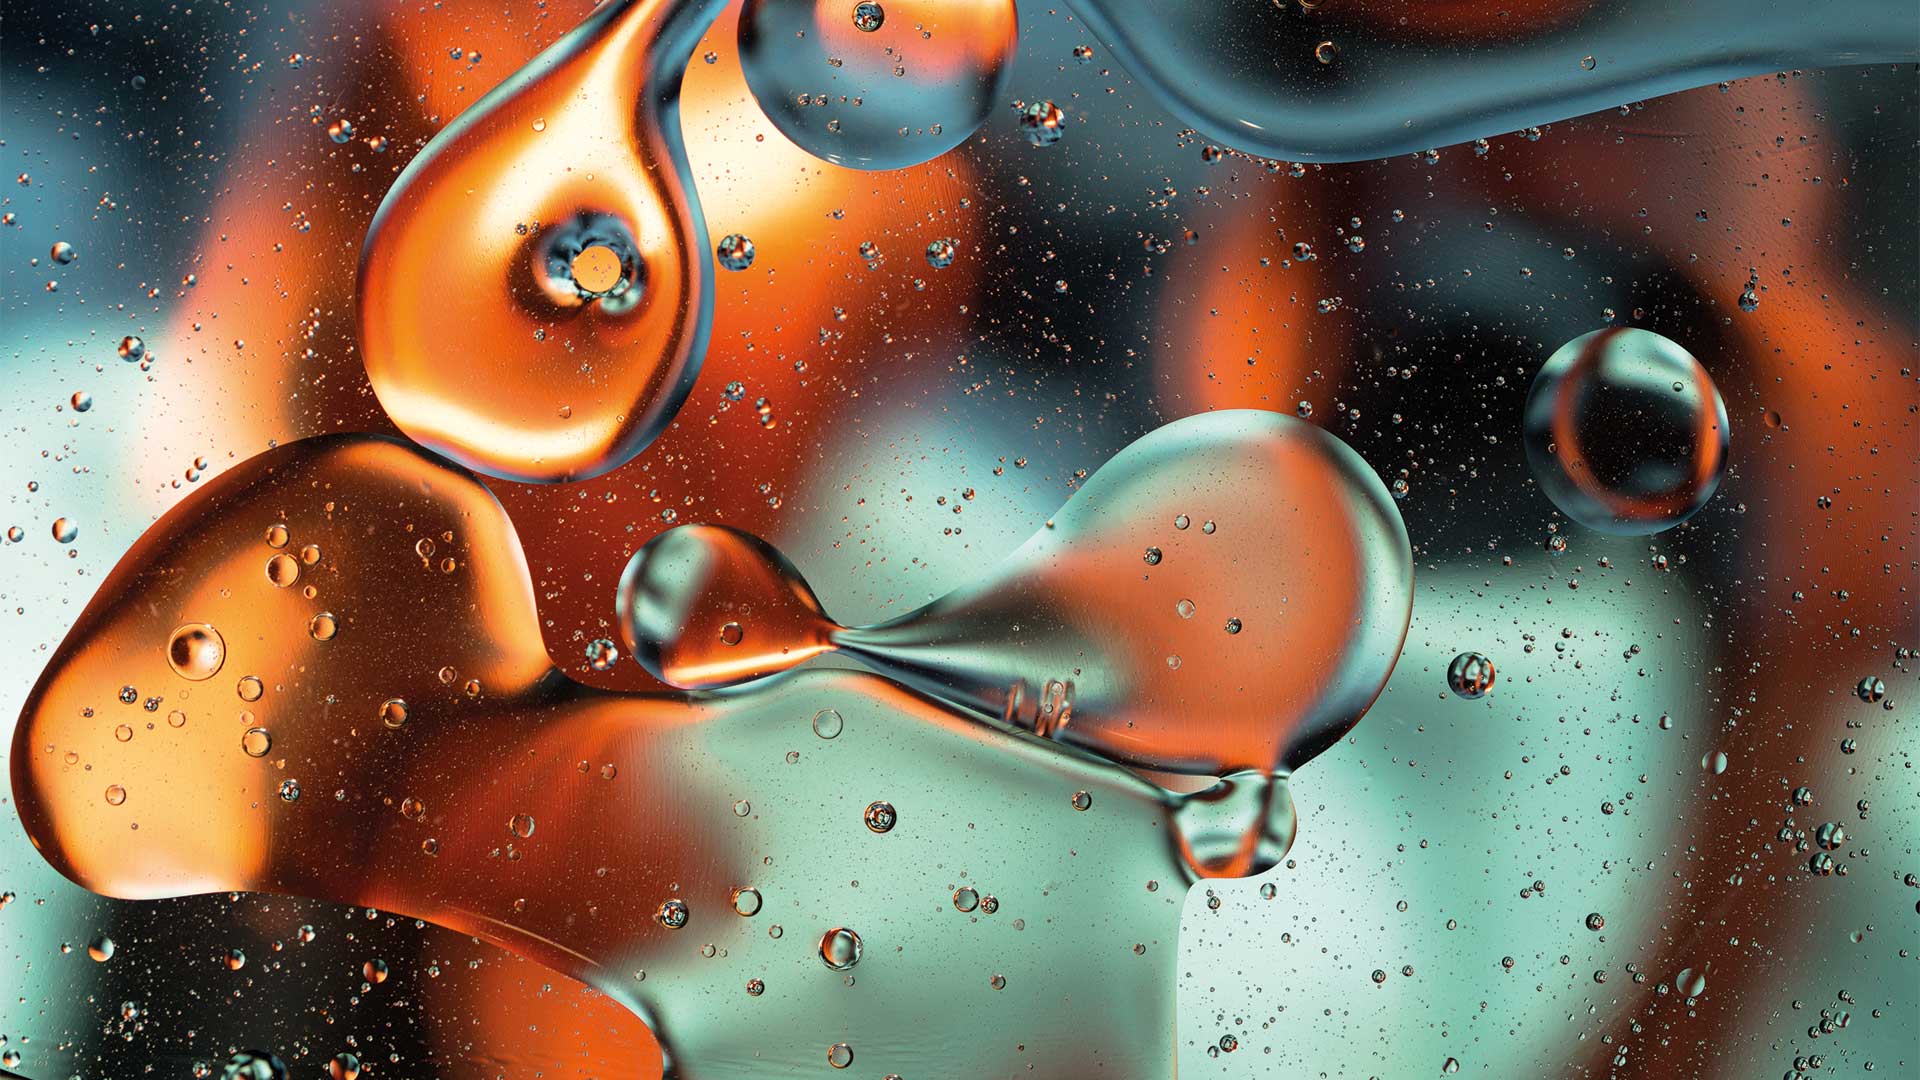 Abstract image of liquid on glass